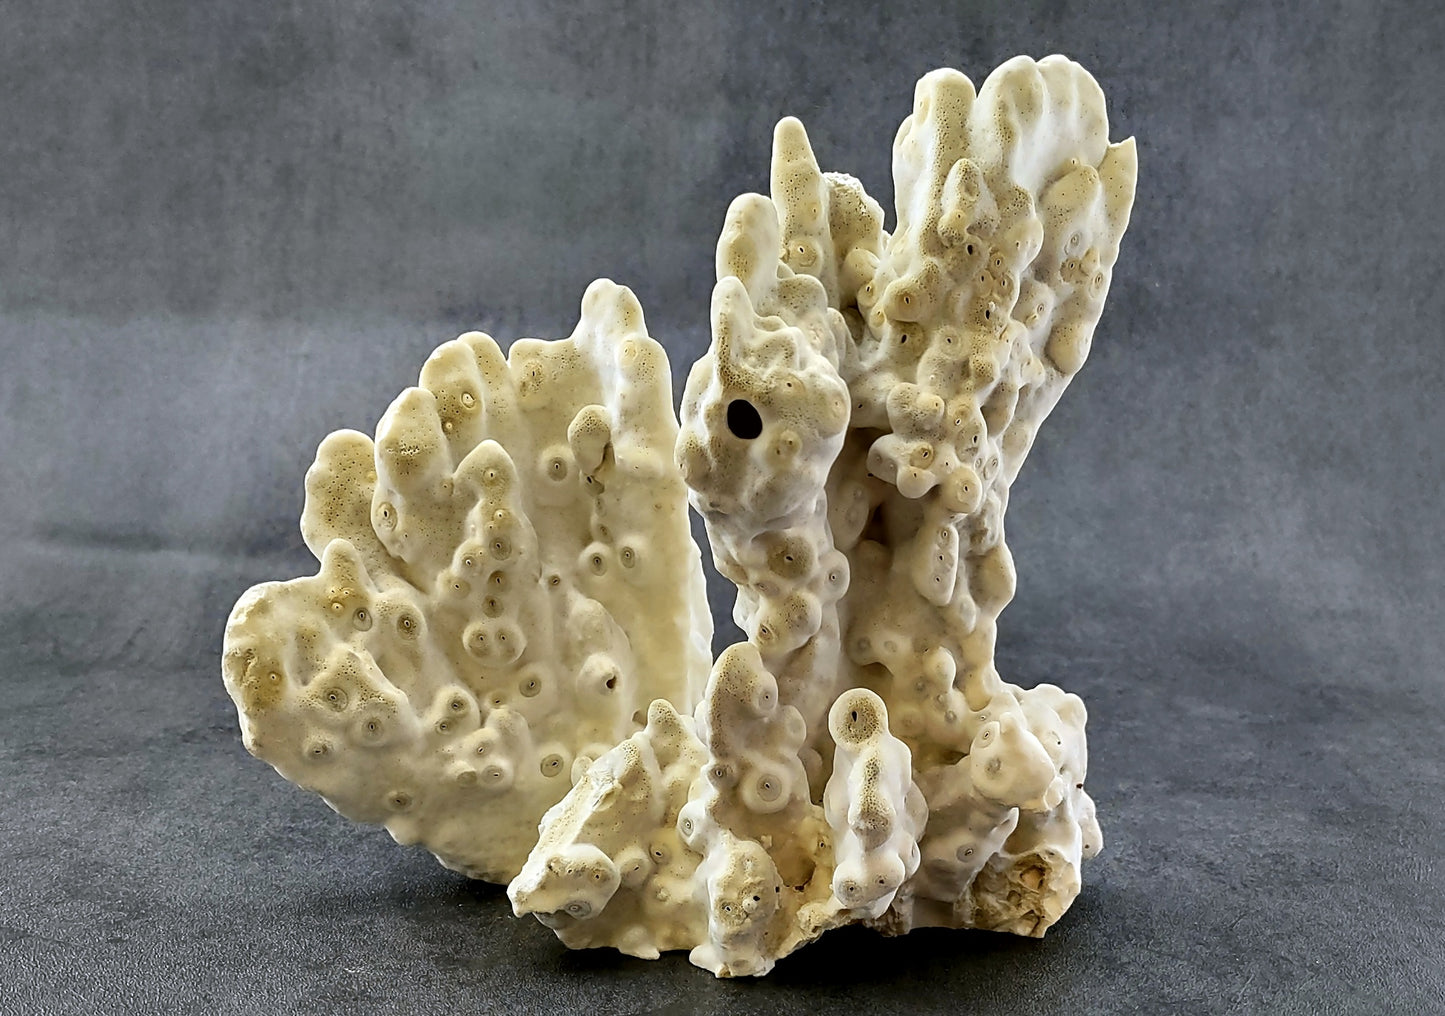 Fire Coral - Millepora Exesa - (Approx. 7-8 inches). White shell with many different layers including little ribbing and crustaceans. Copyright 2022 SeaShellSupply.com.